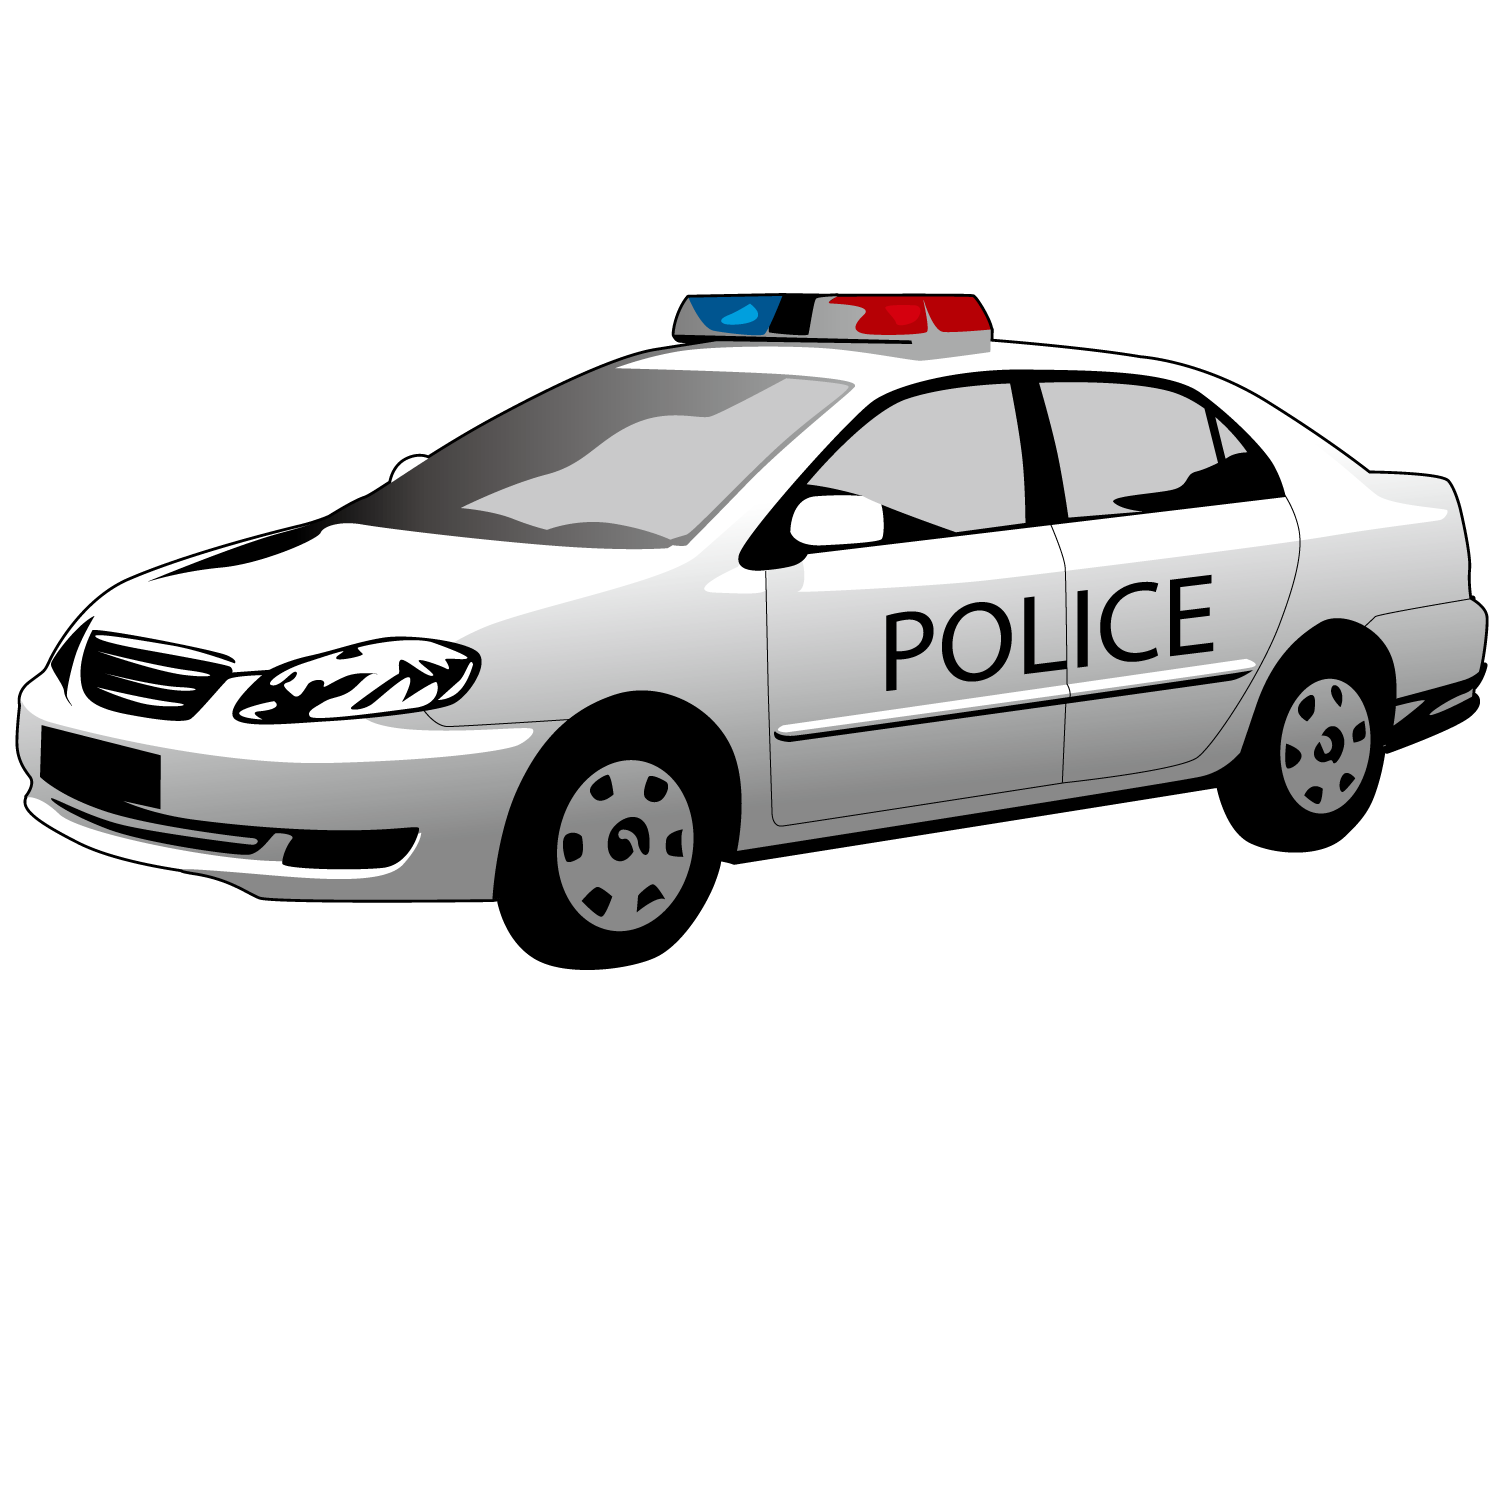 Police Car PNG Background Clip Art